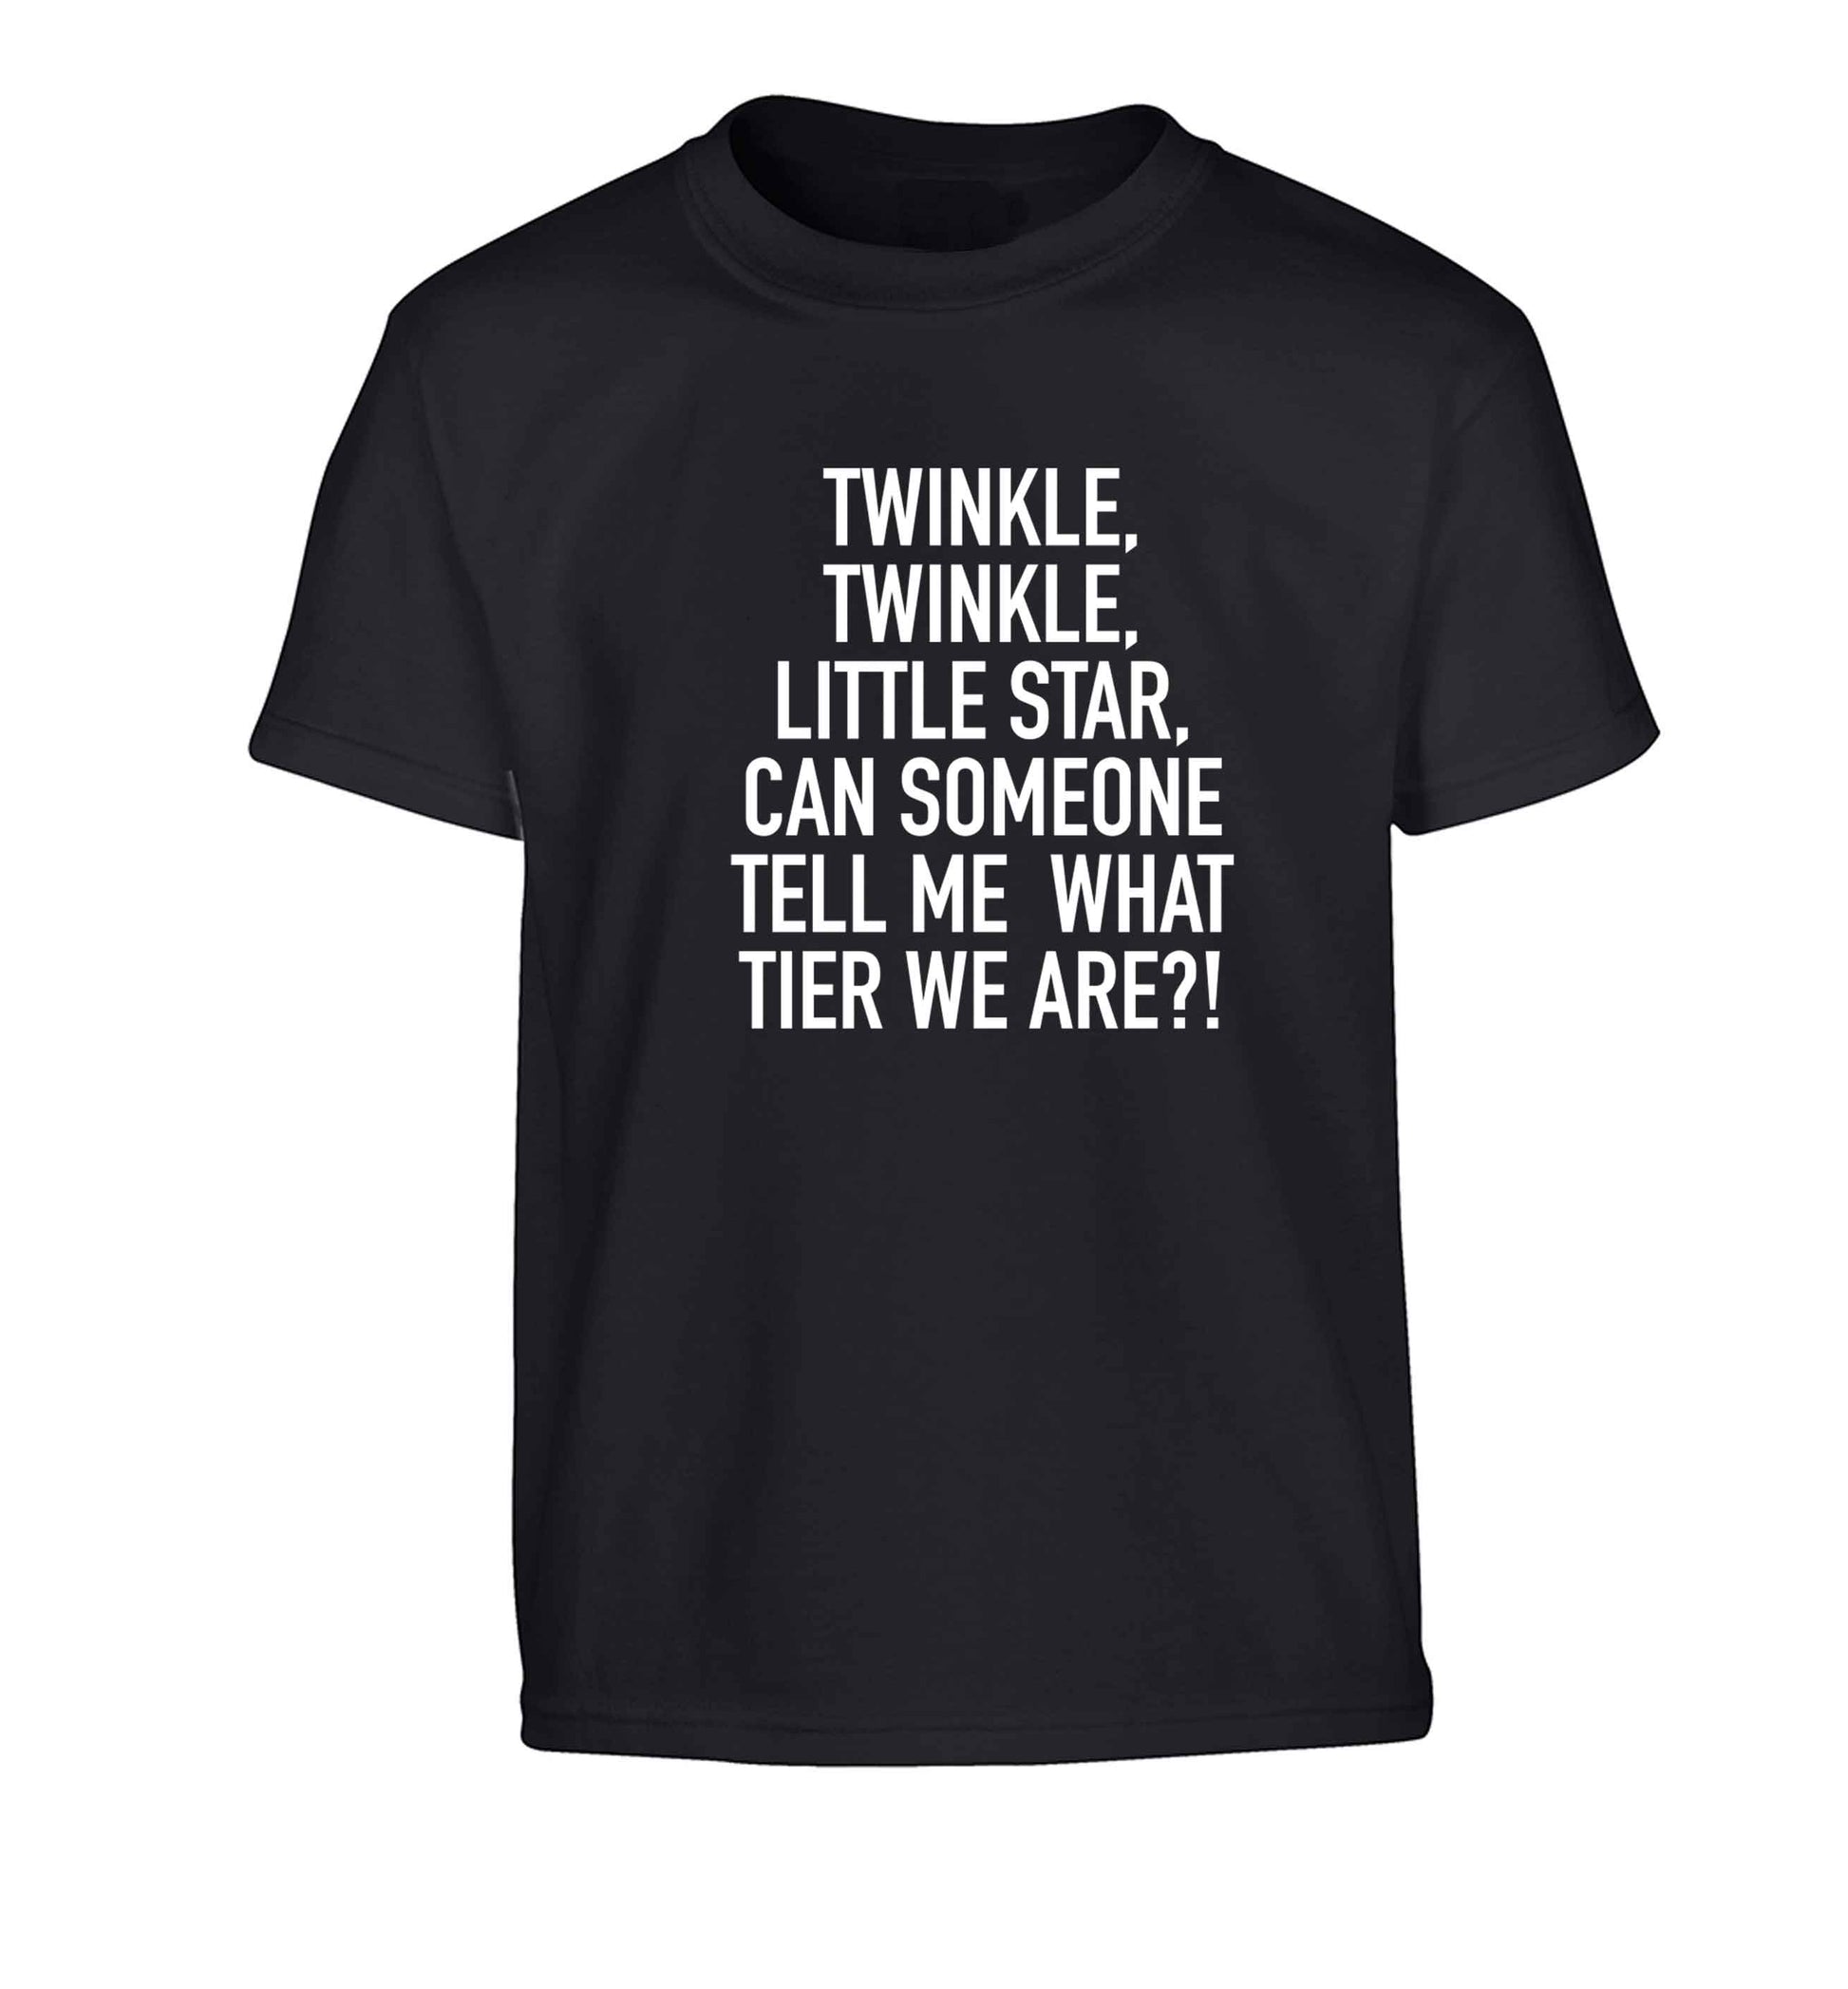 Twinkle twinkle, little star does anyone know what tier we are? Children's black Tshirt 12-13 Years